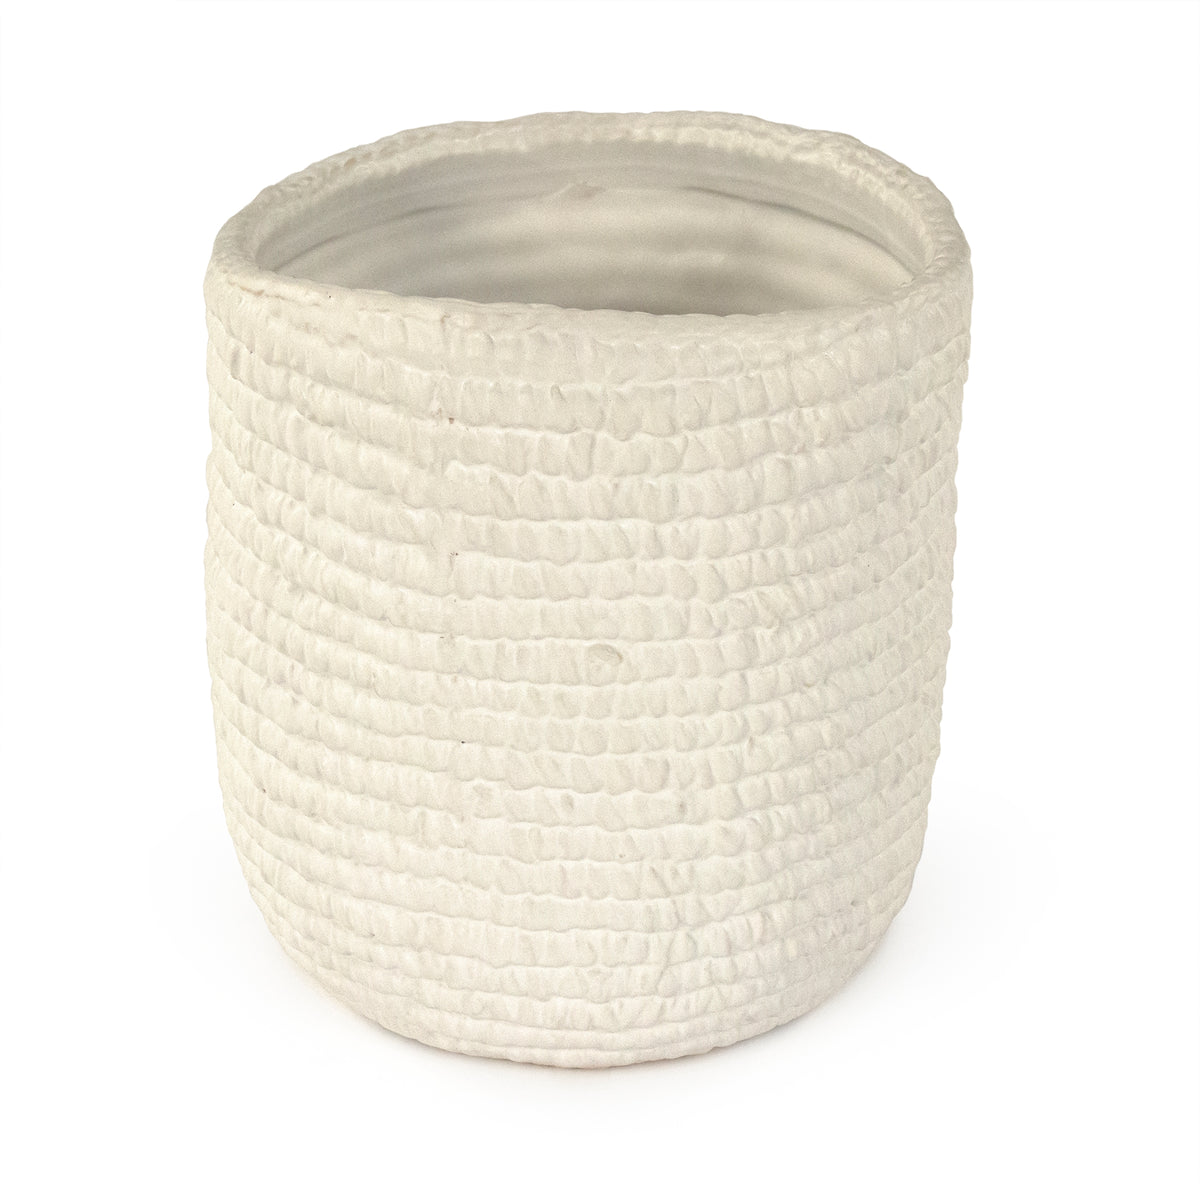 White Cross Weave Vase Small by Zentique